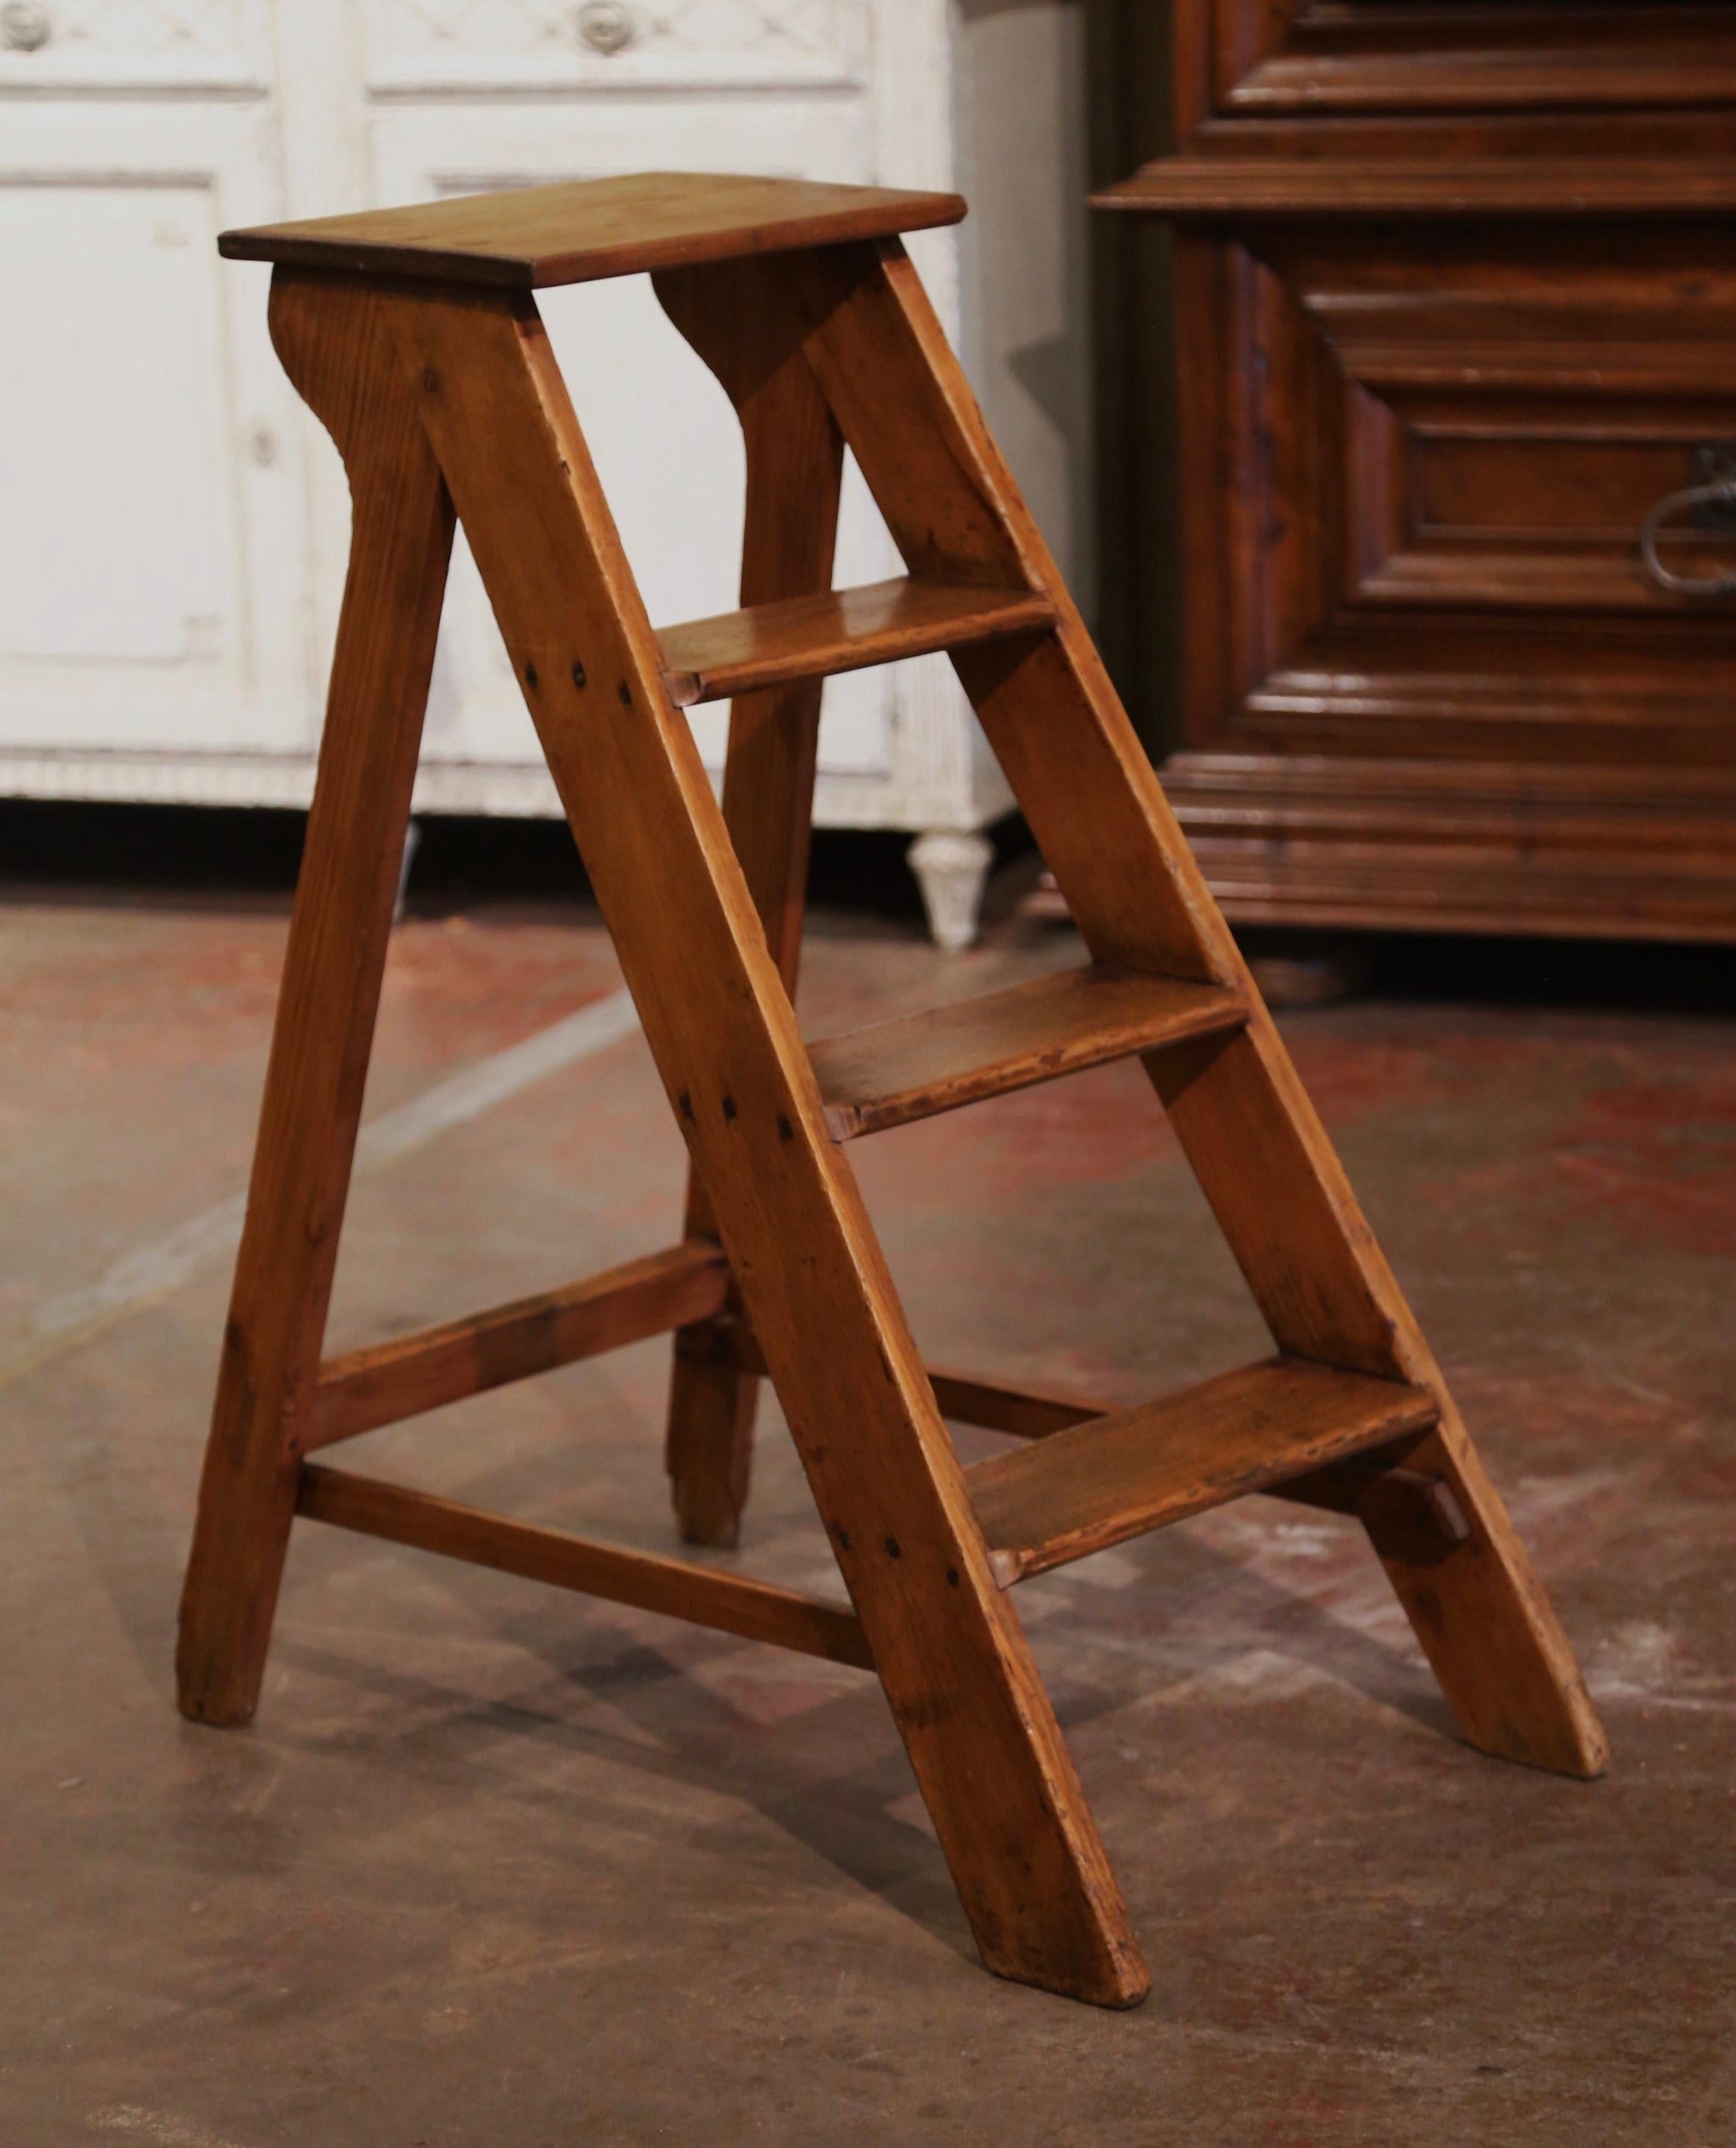 This elegant antique library ladder was created in Normandy France, circa 1920. Made of pine, the sturdy step ladder features four steps including a deeper step at the top. The small ladder is in excellent condition commensurate with age and use,